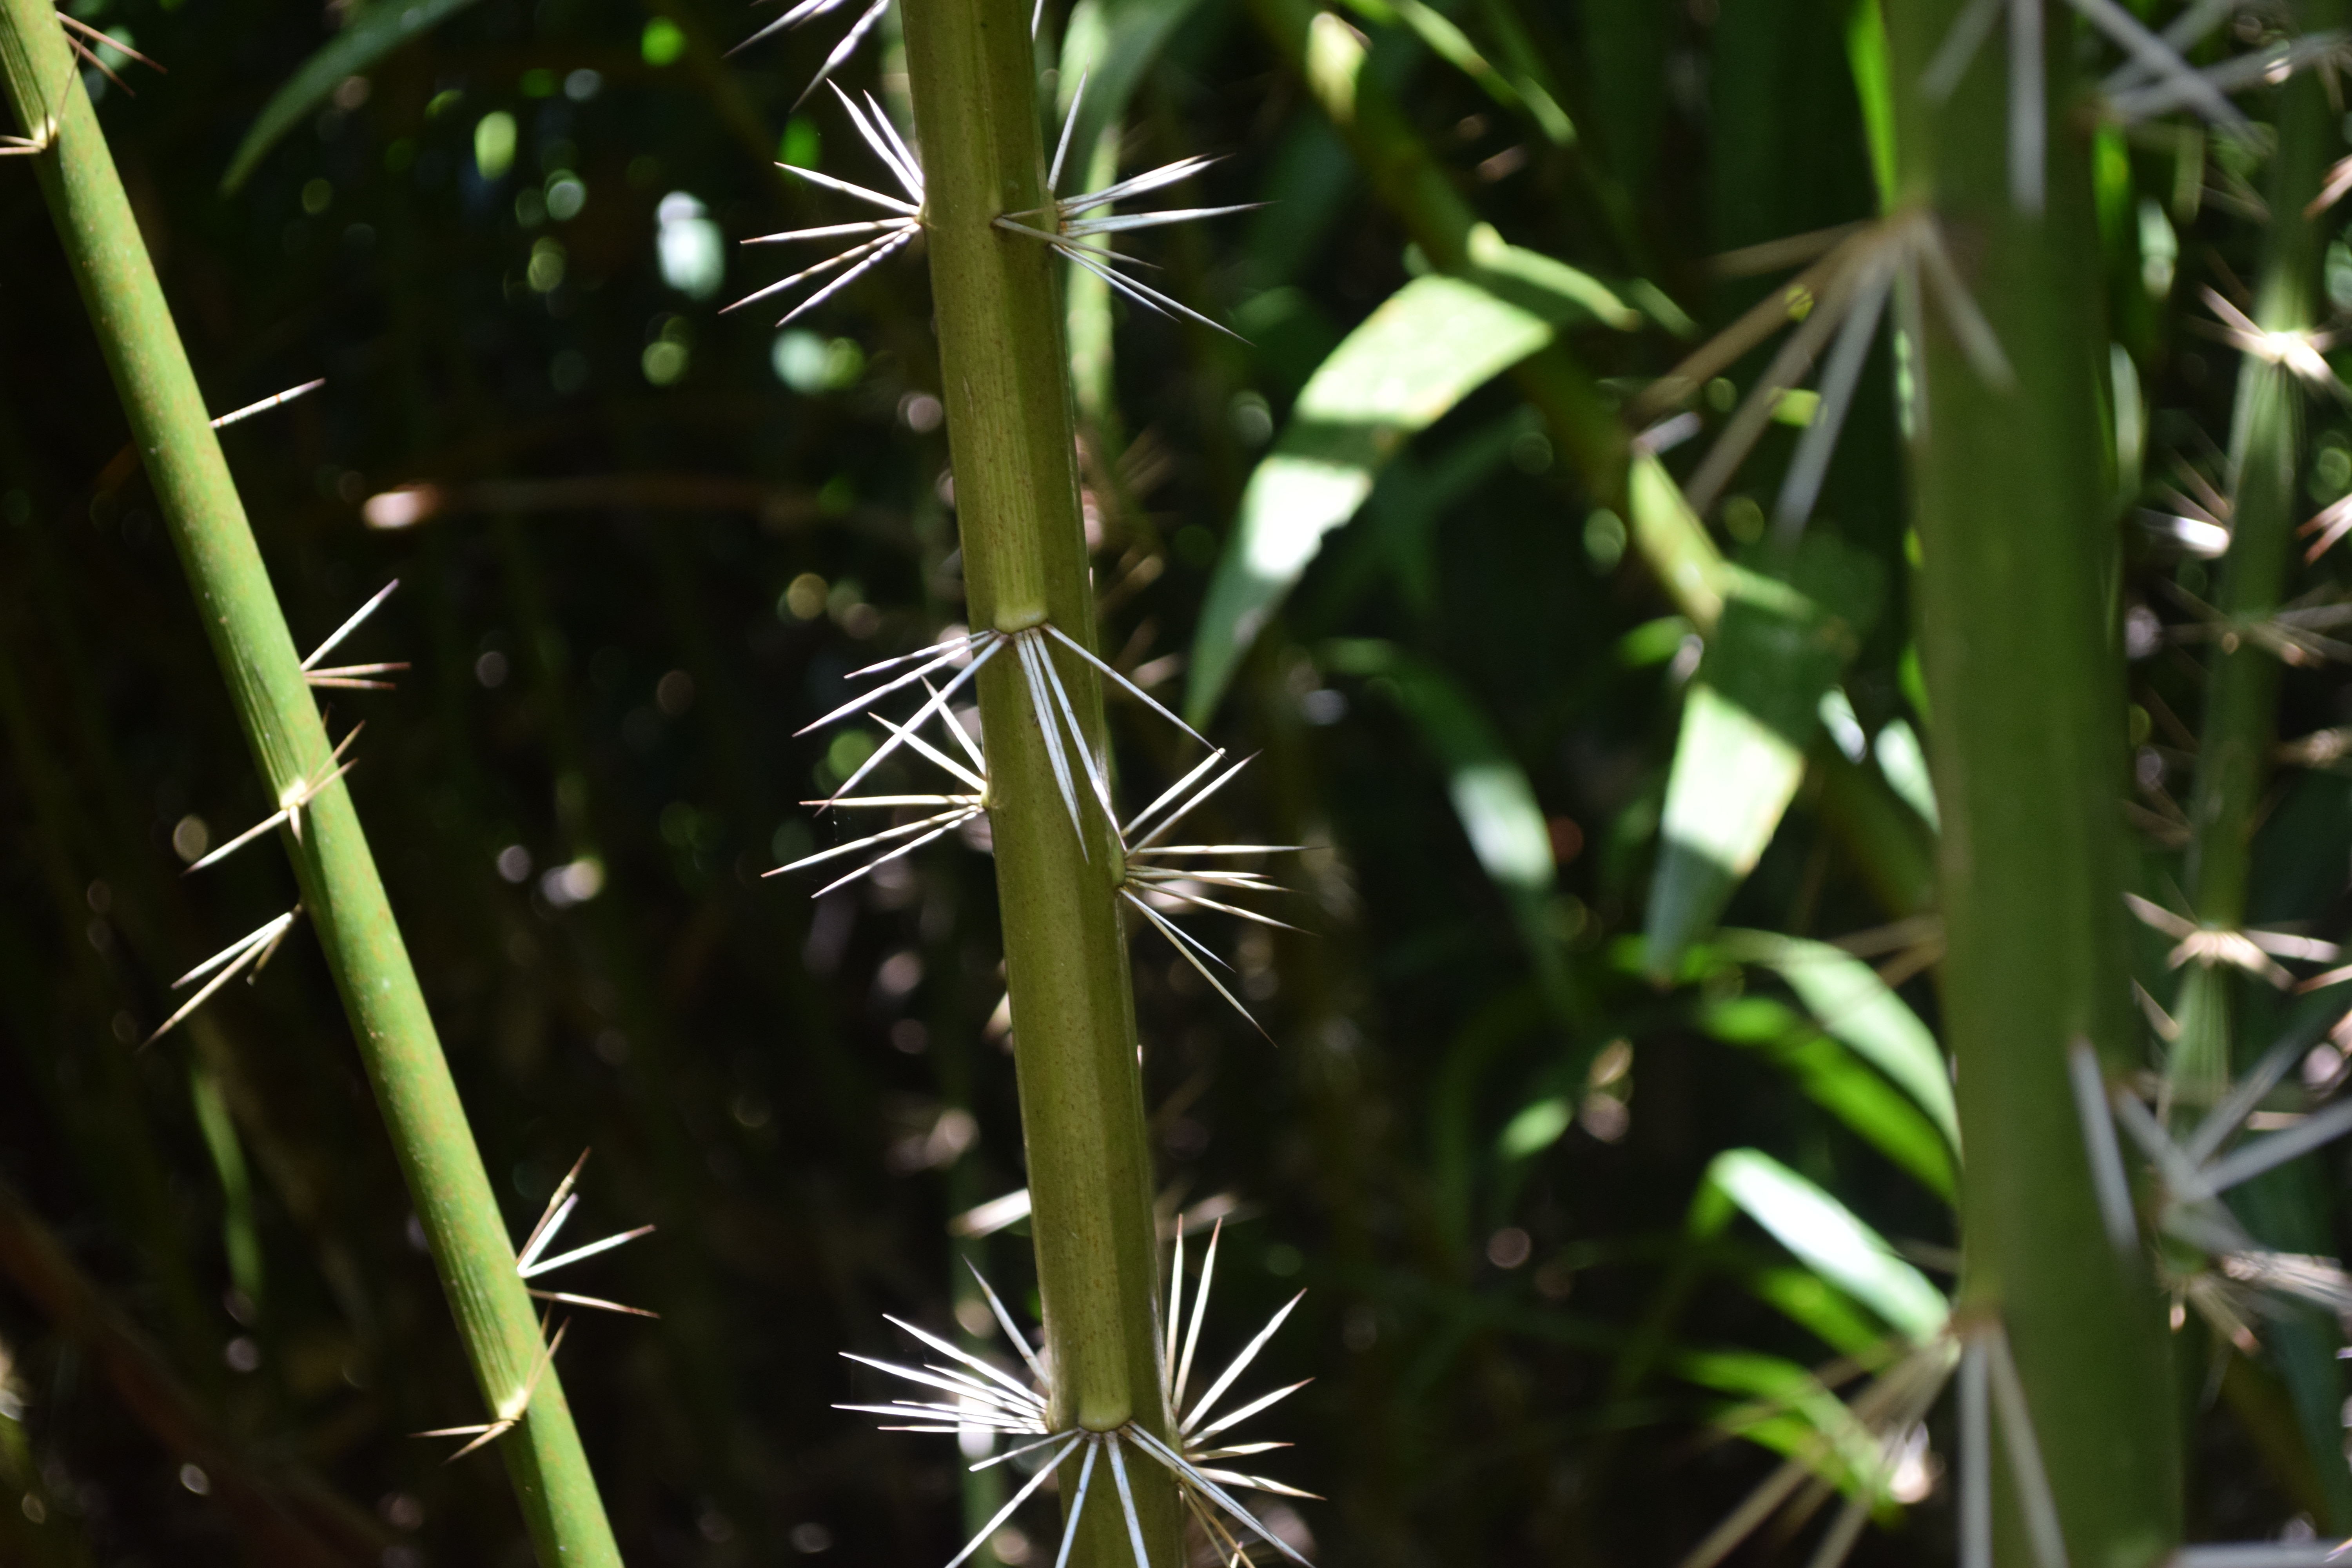 spike of plant in close up photography